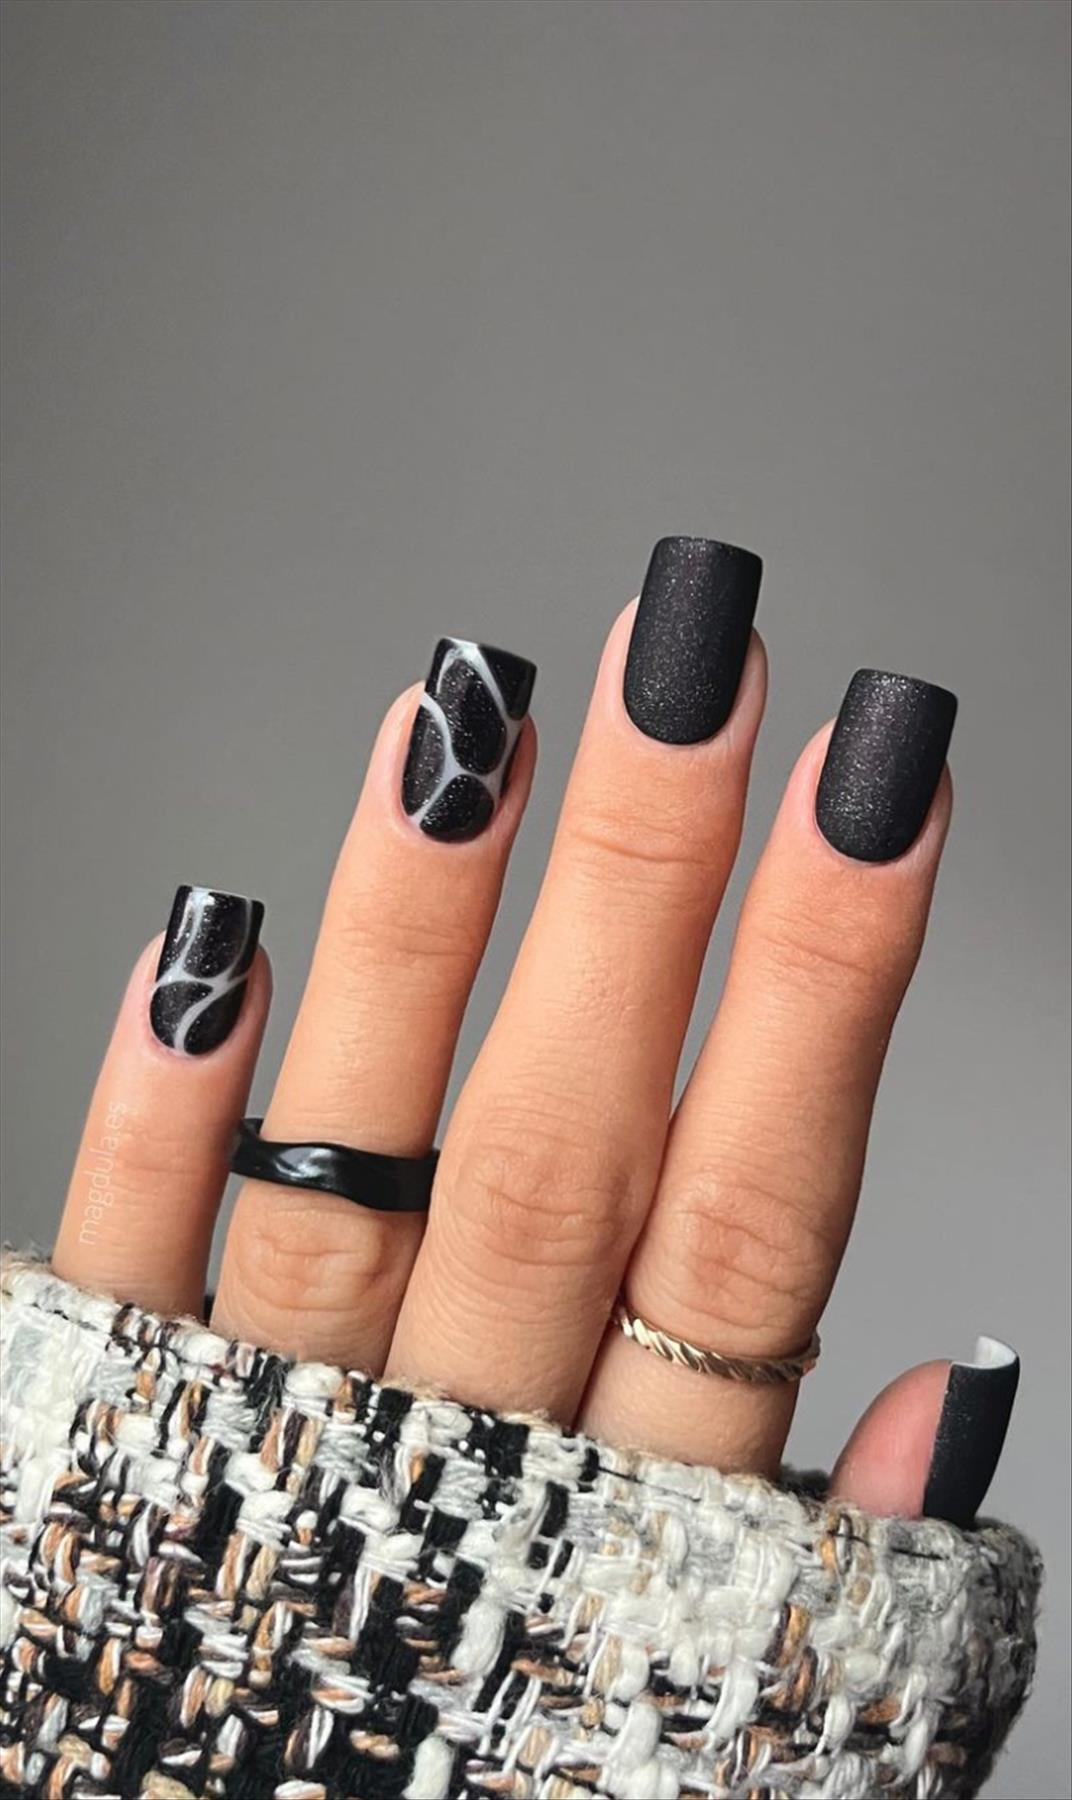 Cool black nail design for winter nails